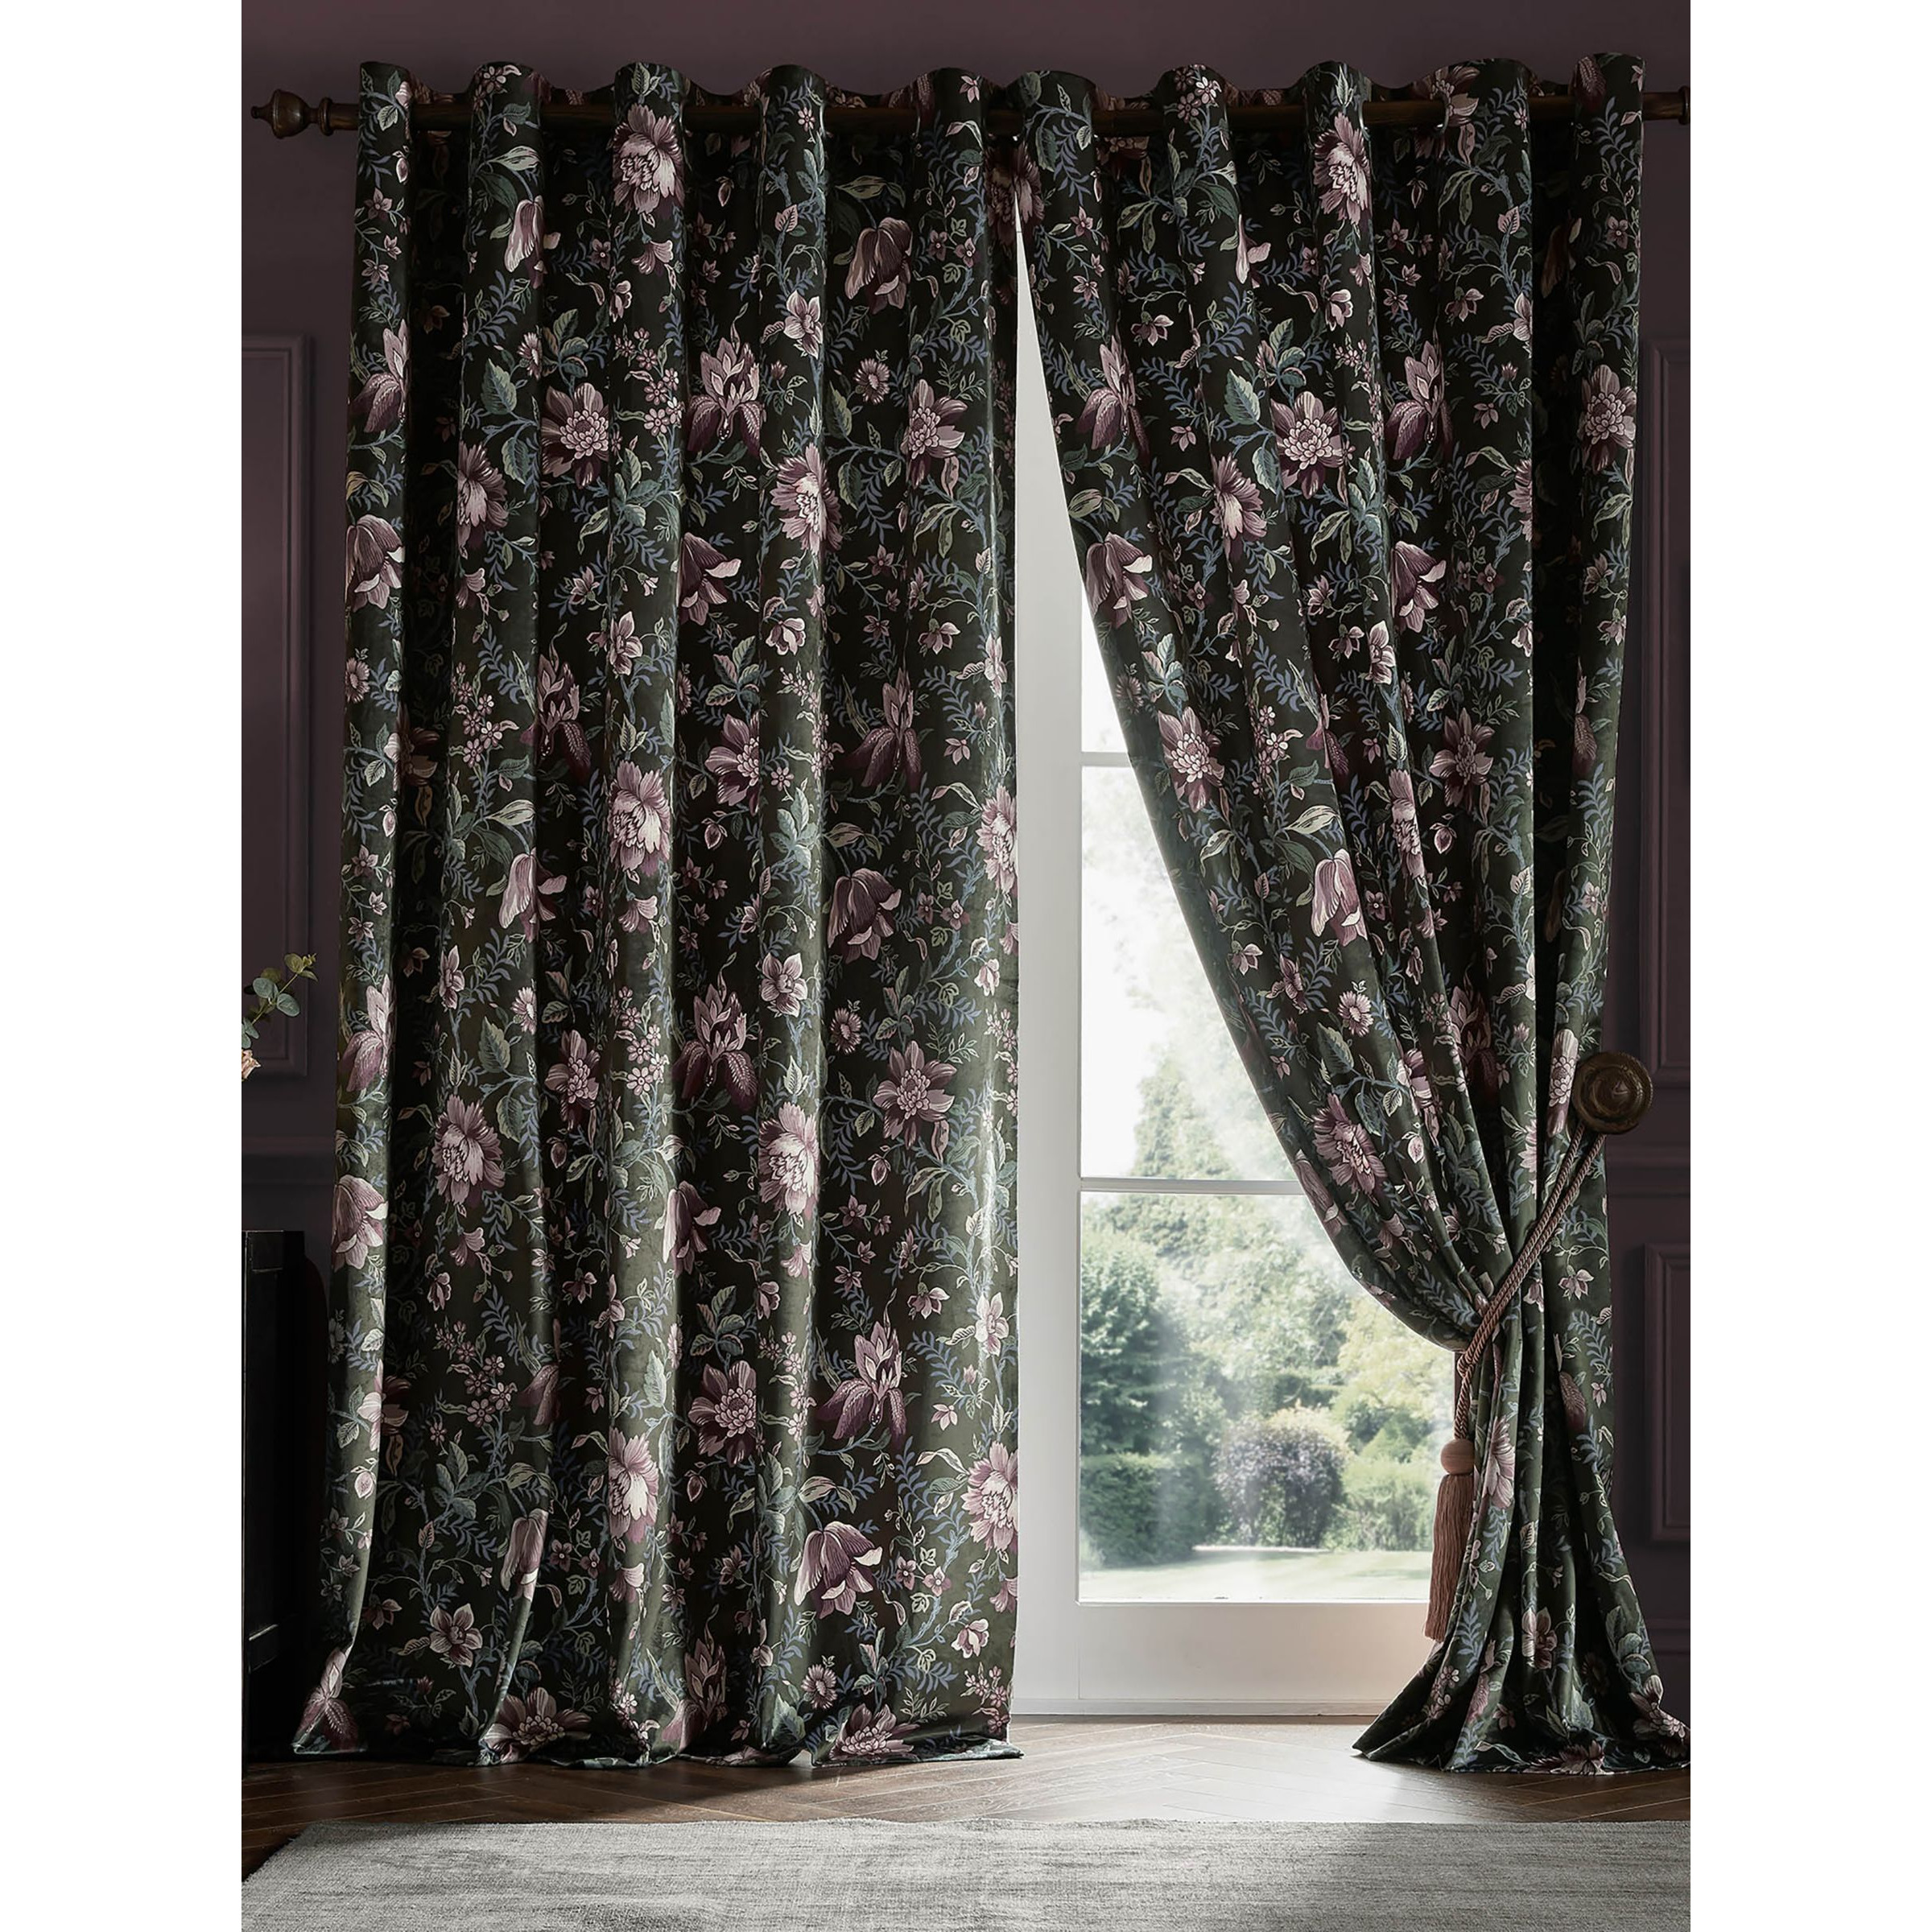 Laura Ashley Edita's Garden Pair Lined Eyelet Curtains, Charcoal - image 1